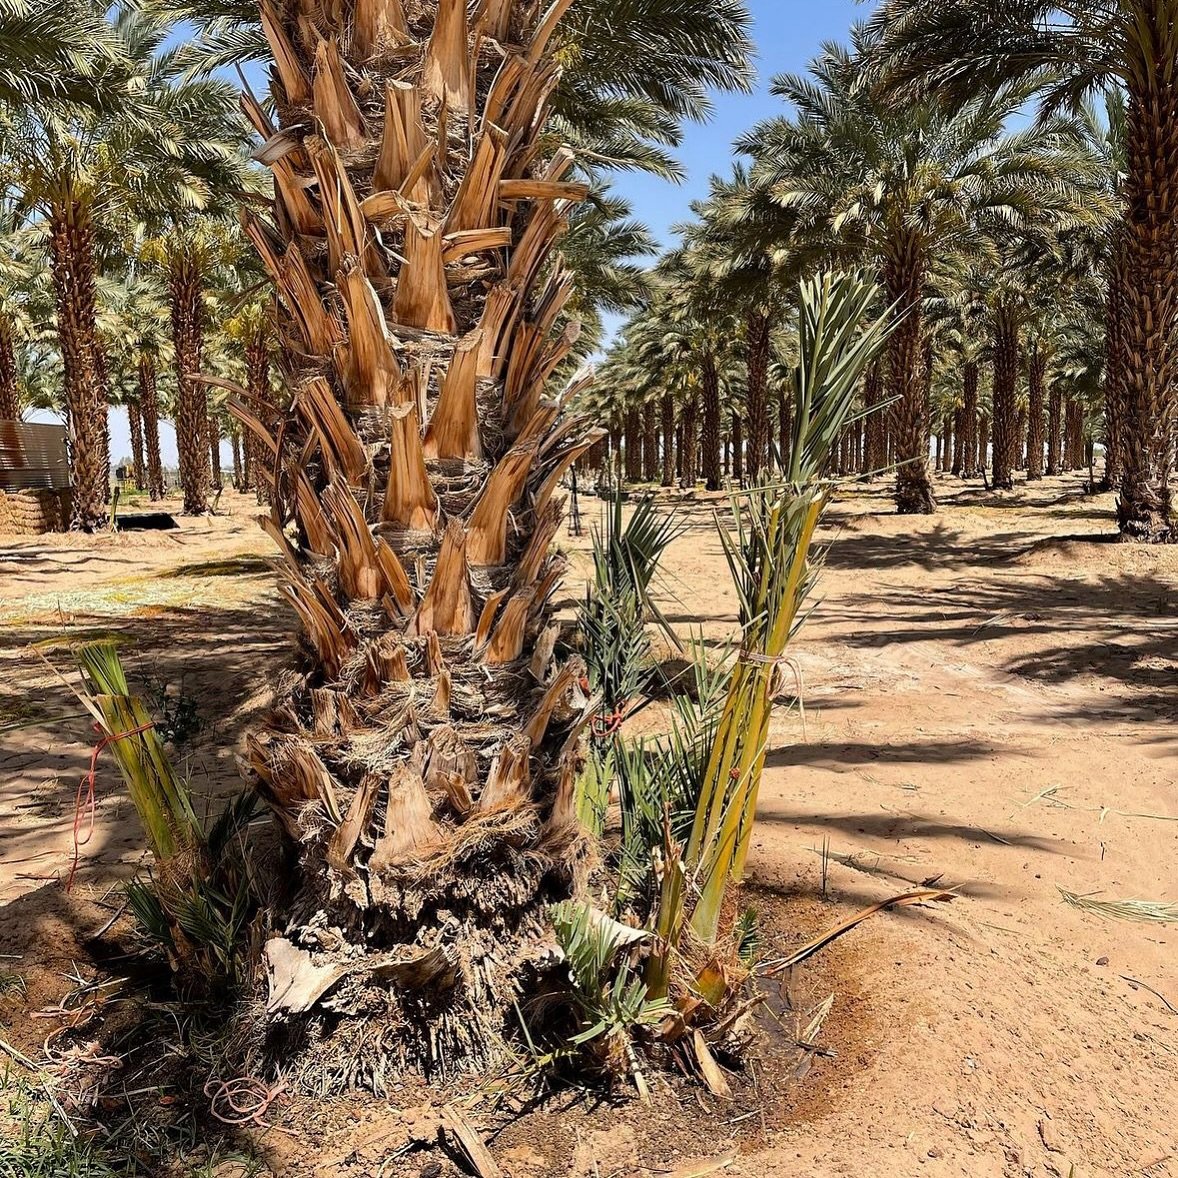 Did you know that date trees produce date palm shoots? 

Once the shoots are big enough, they are removed from the parent plant and replanted. 

April - September are months when the trees have active growth, so it is a good time to plant the shoots.